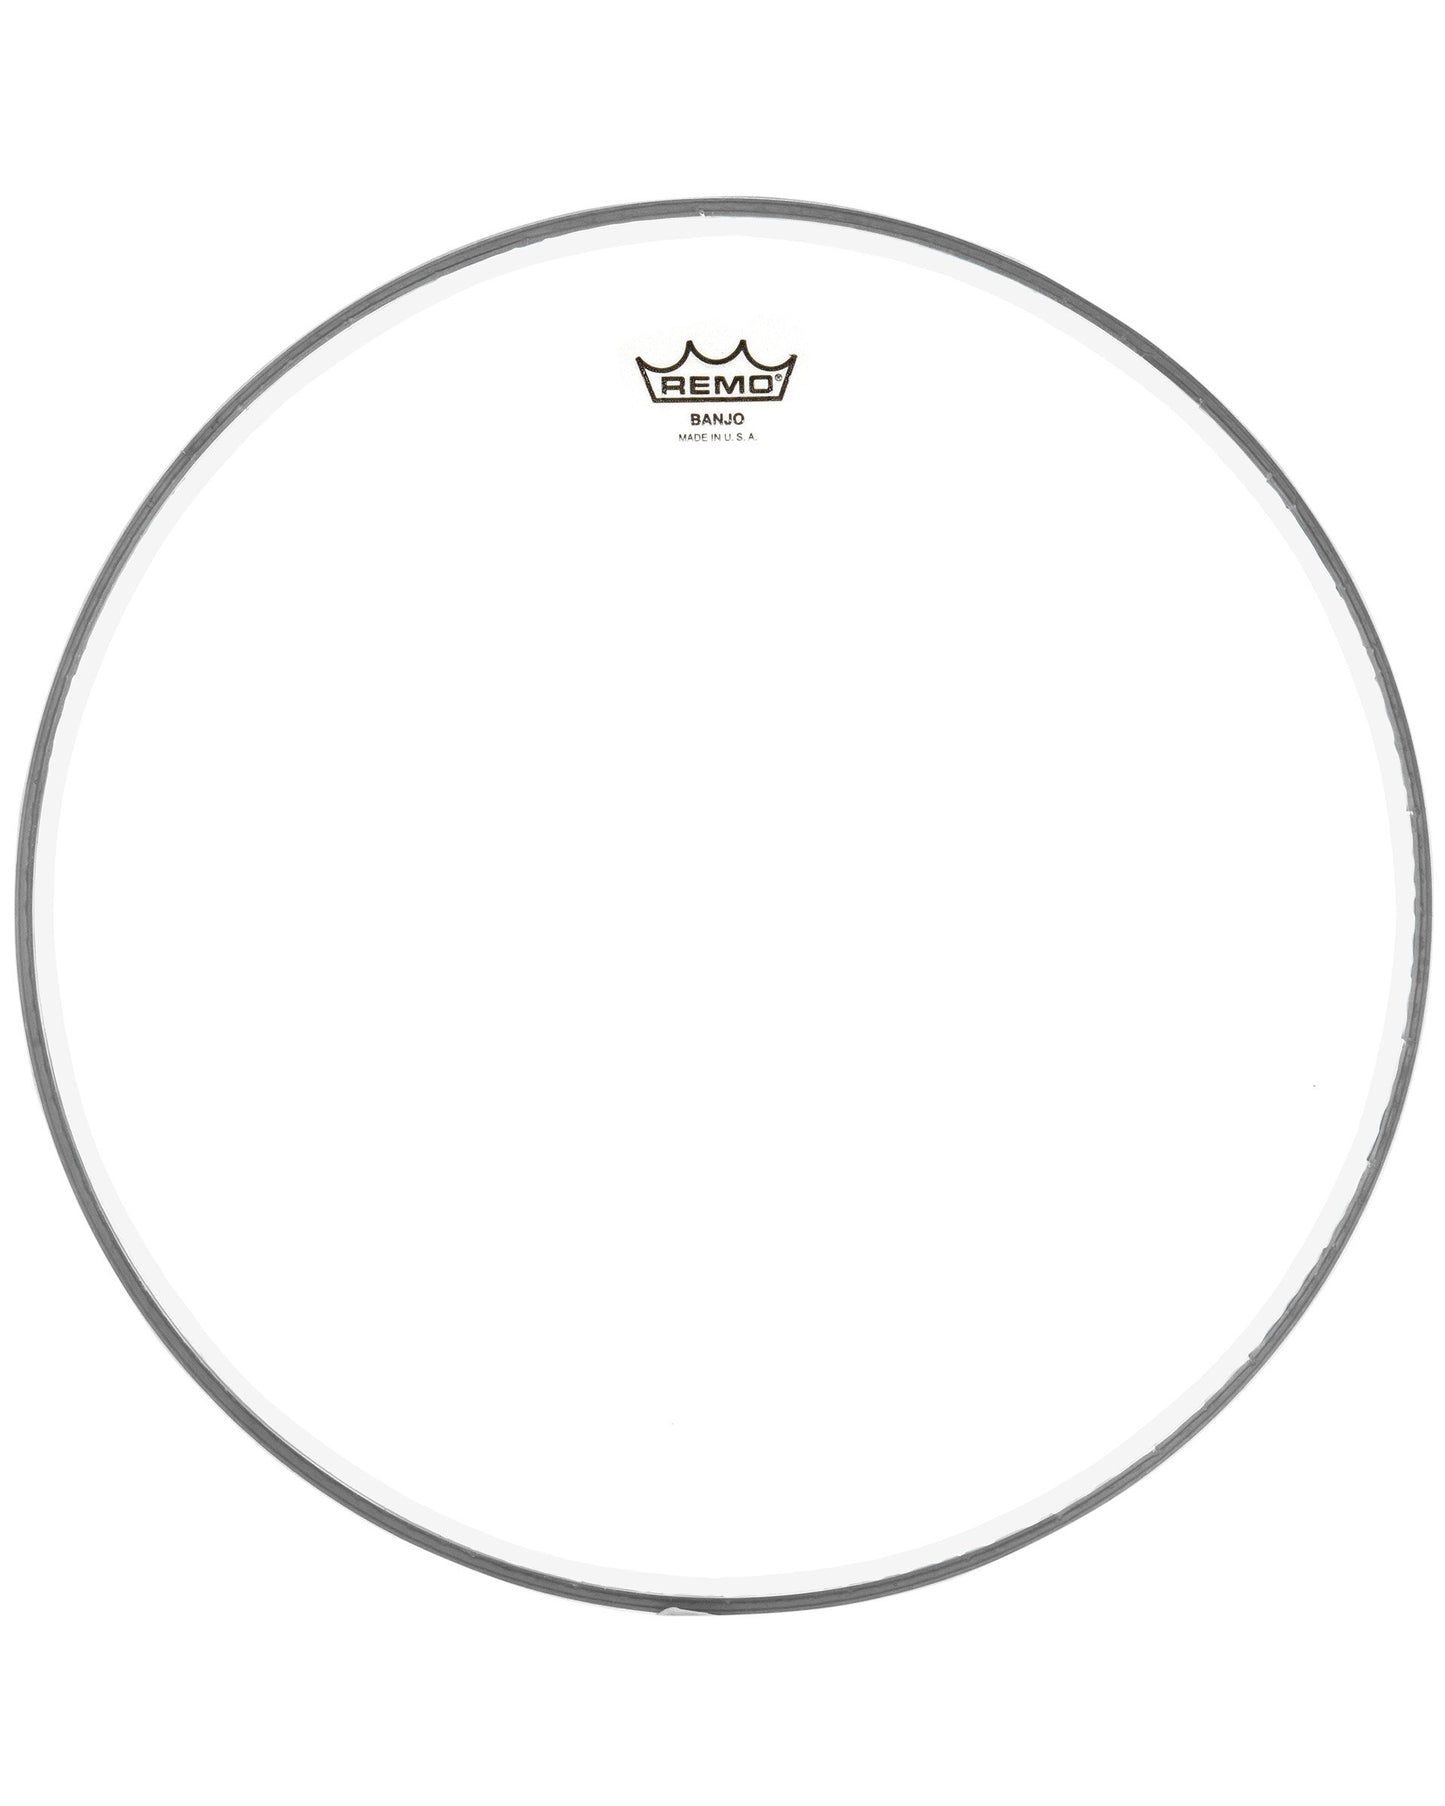 Image 1 of Remo Clear Banjo Head, 10 3/4 Inch Diameter, Medium Crown (7/16 Inch) - - SKU# B1012-M-CLR : Product Type Accessories & Parts : Elderly Instruments